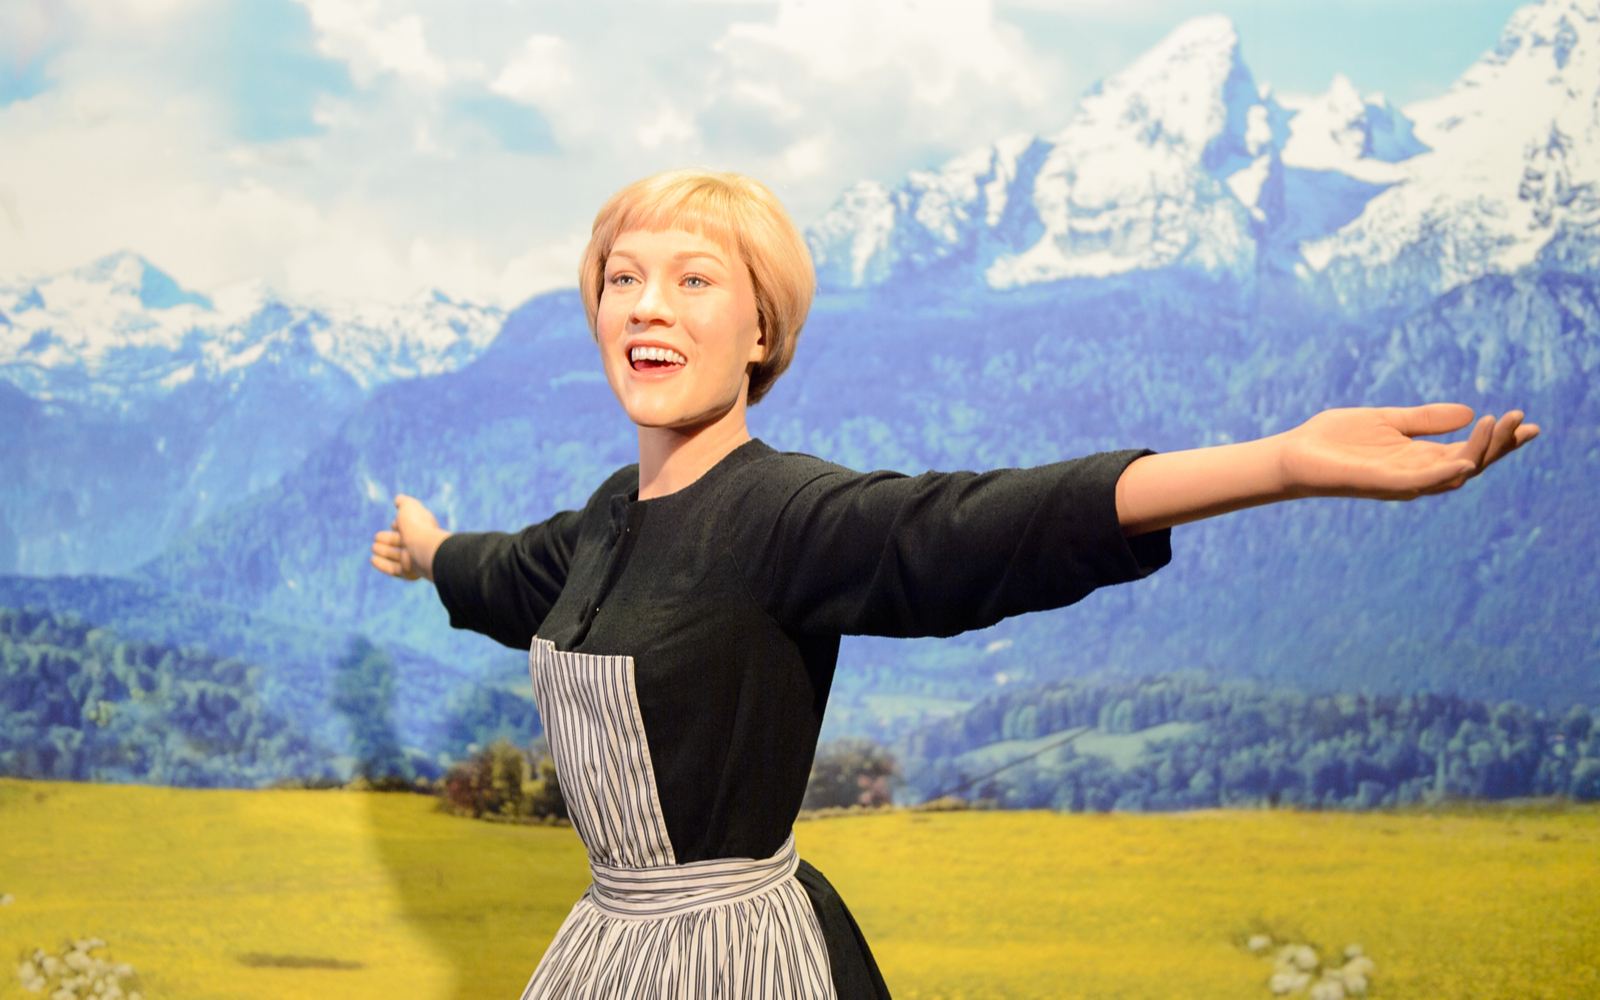 Featured image for The Sound of Music filming locations with Maria holding her arms out